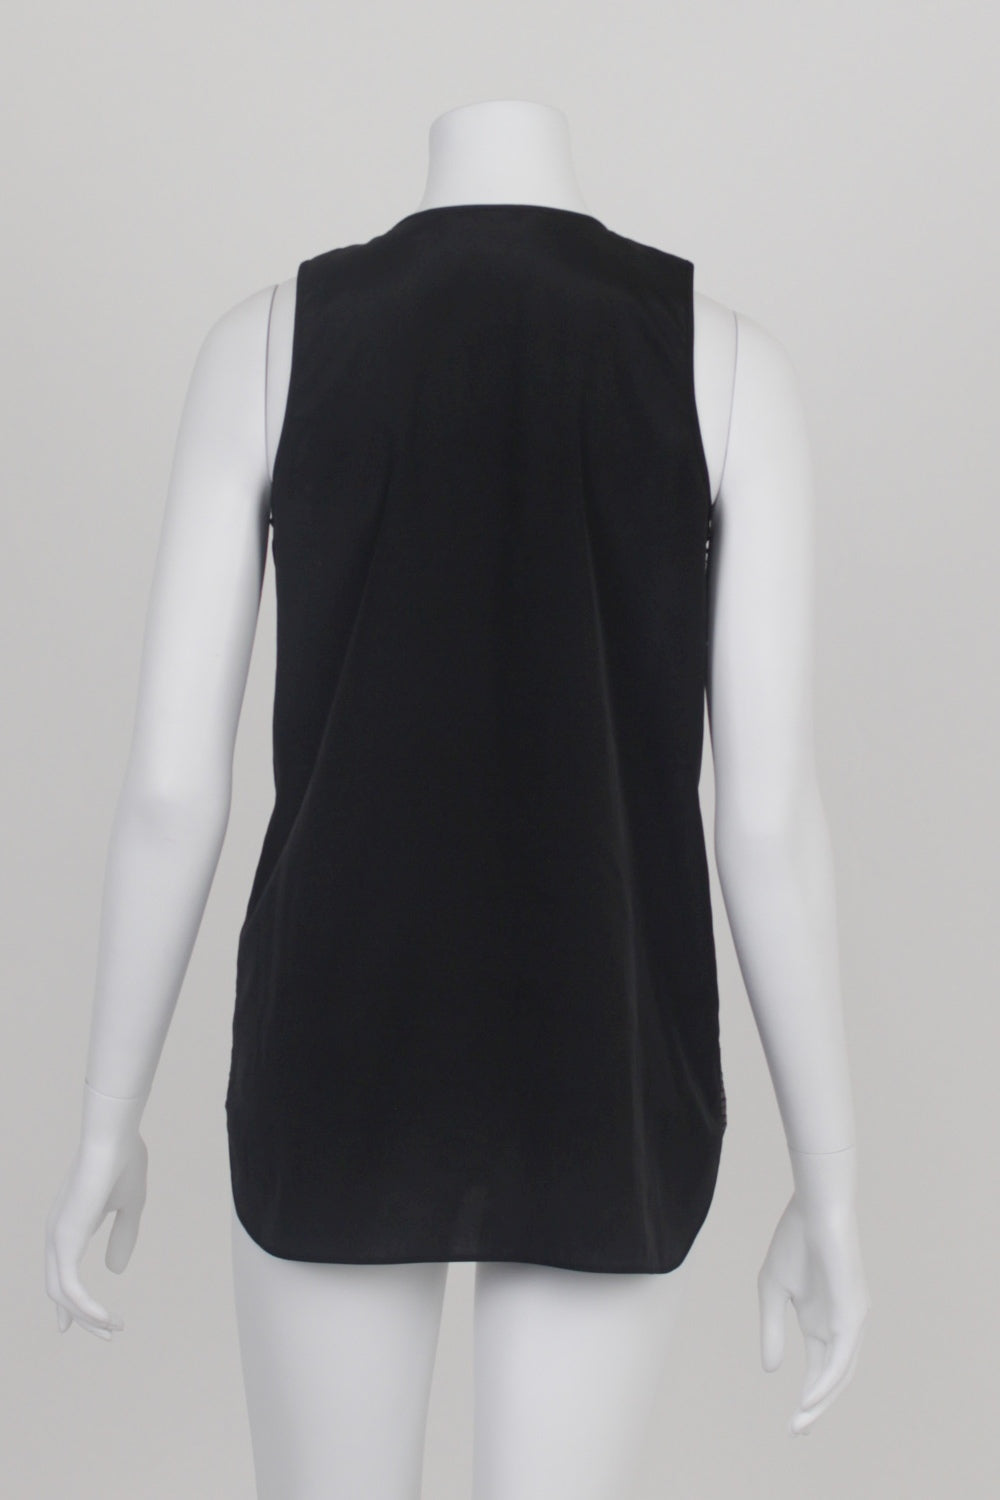 Country Road Black Textured Silk Top S